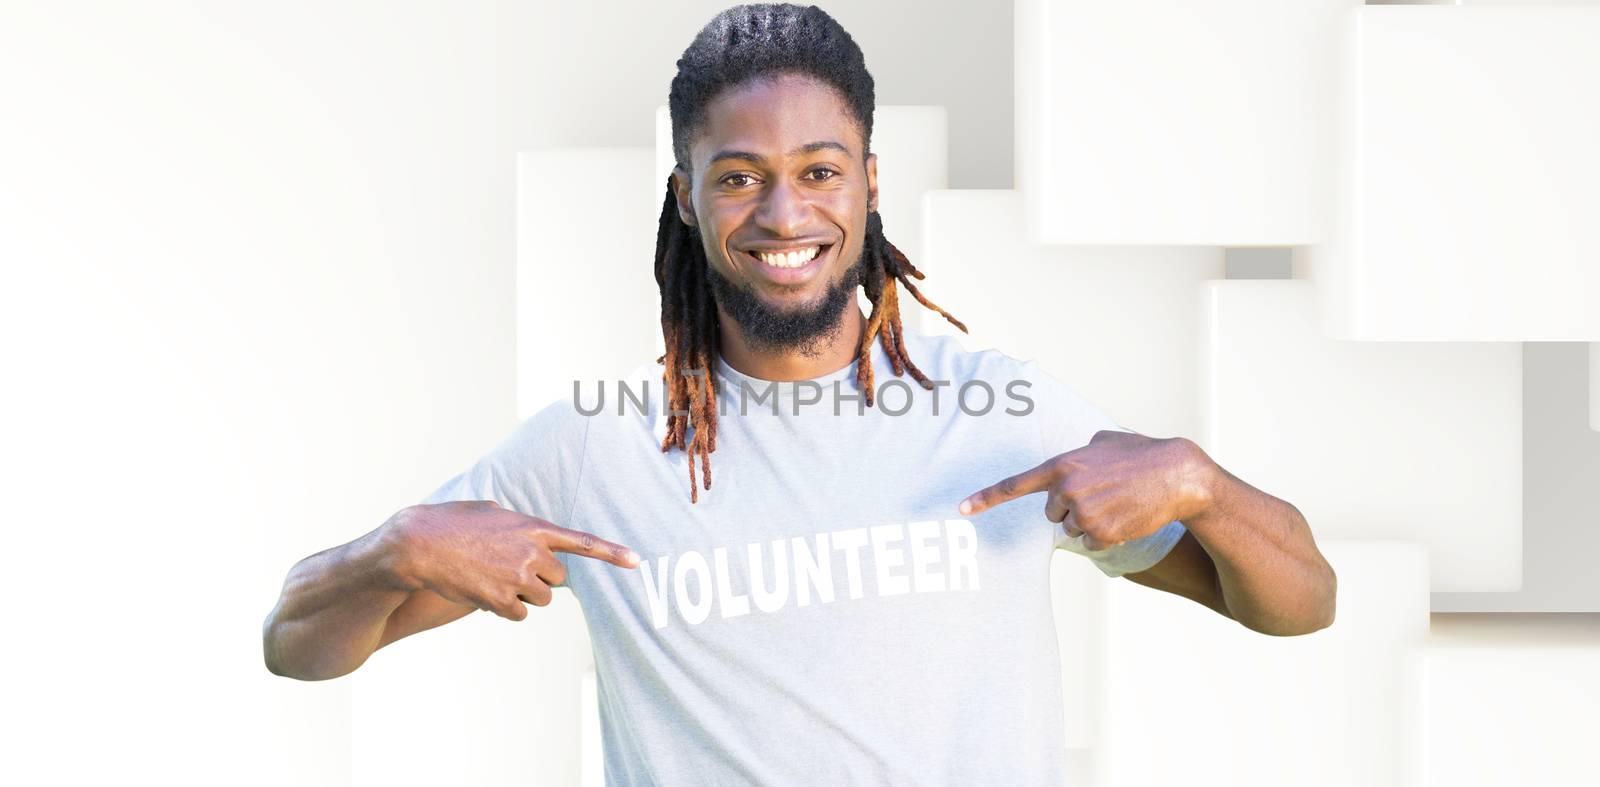 Happy volunteer in the park against abstract white design